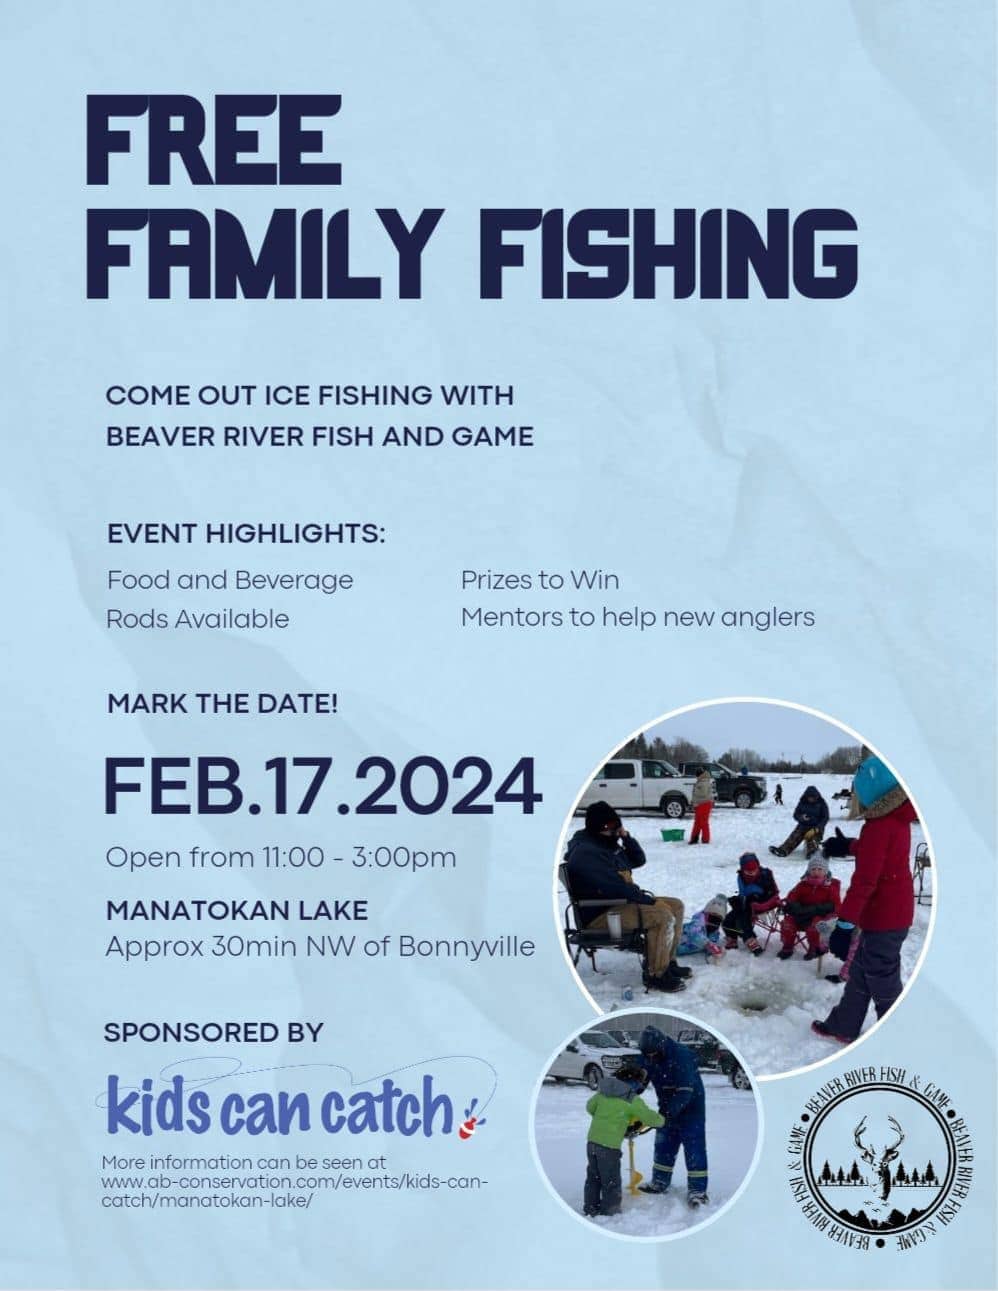 Free fishing pole giveaway for kids at Englund Marine, Local News